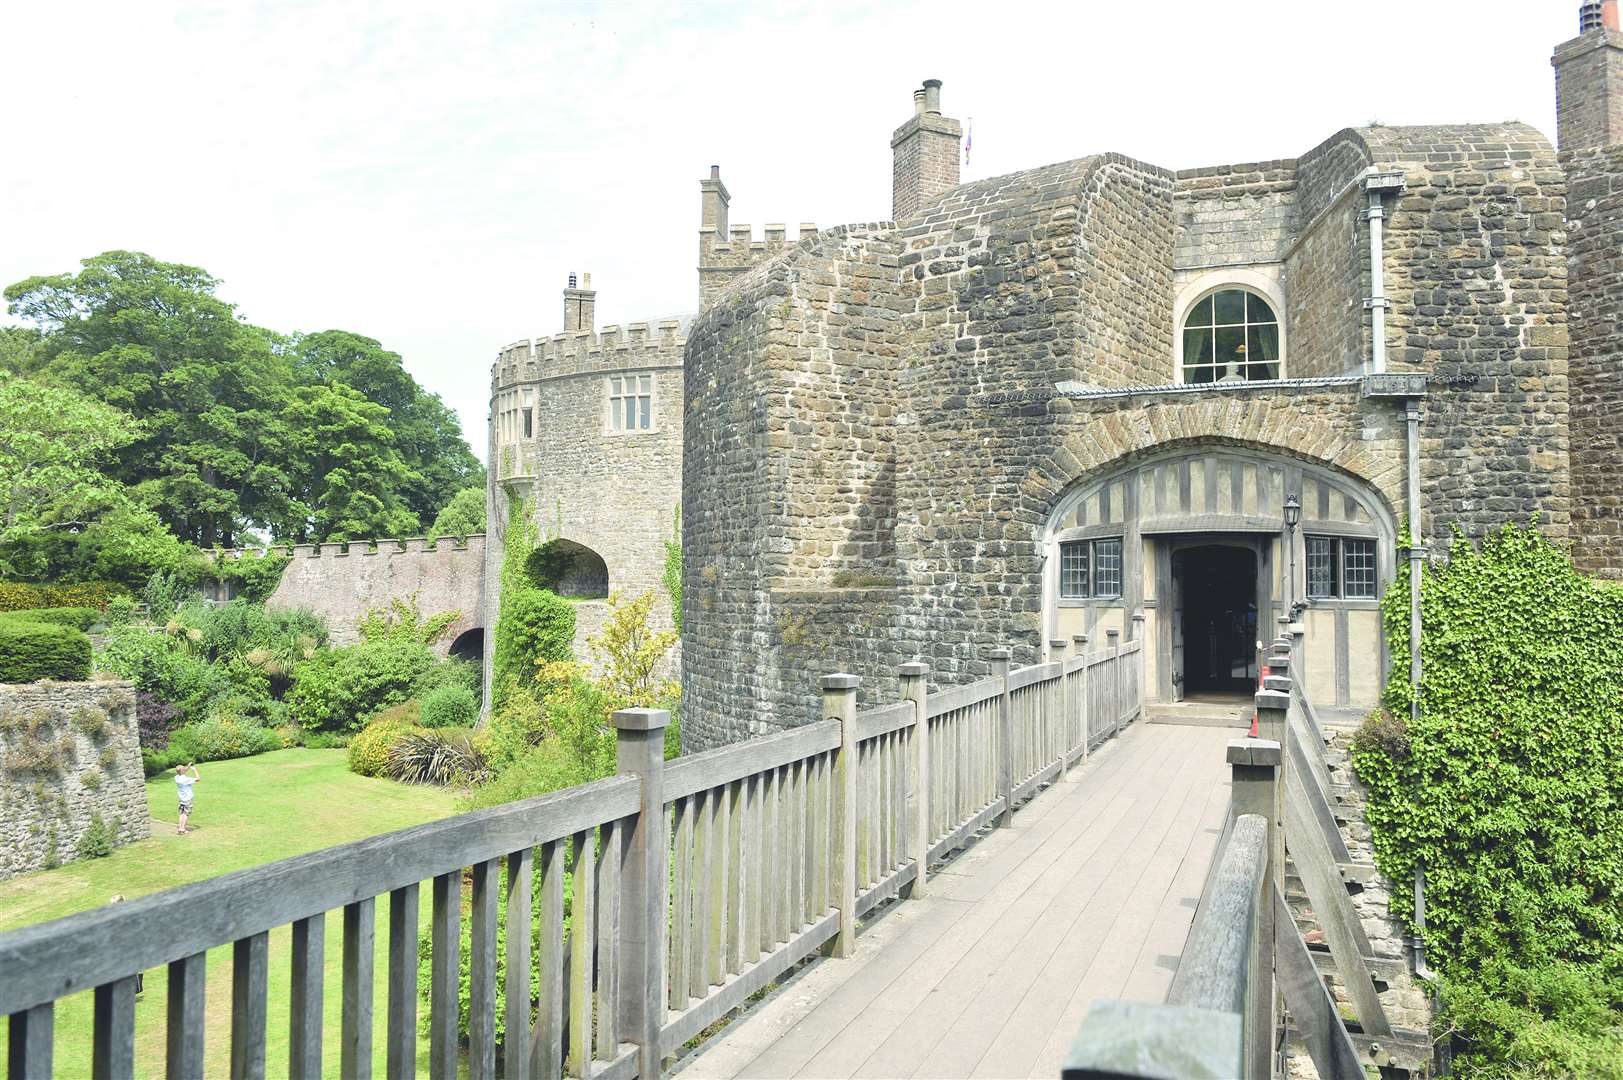 Walmer Castle and gardens will play host to the Changeling Theatre which will perform A Midsummer's Night's Dream.